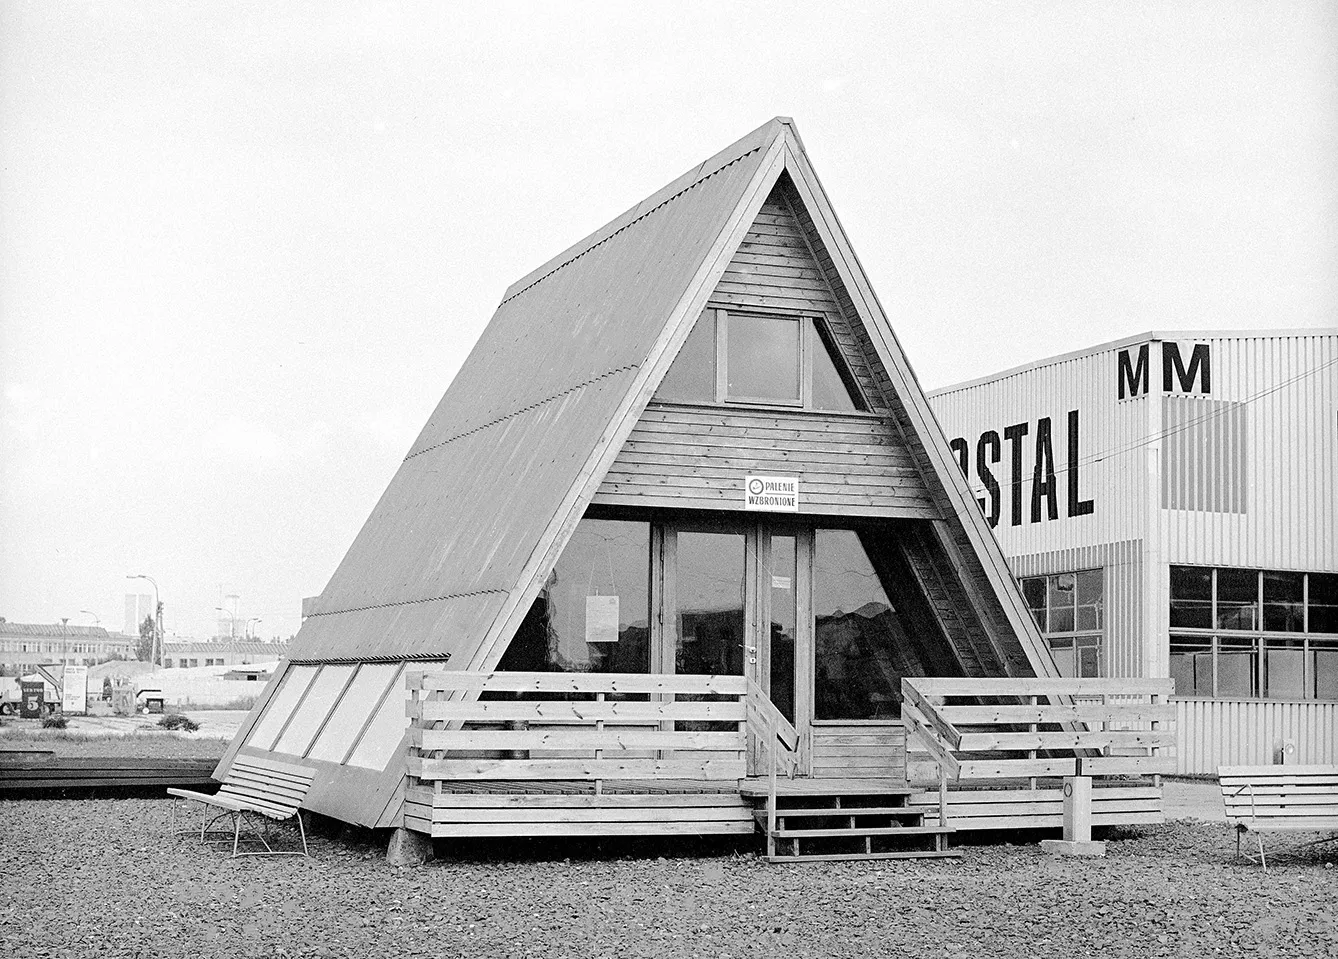 The "Brda" summerhouse. On the right, the "Mostostal" hall, 1980.